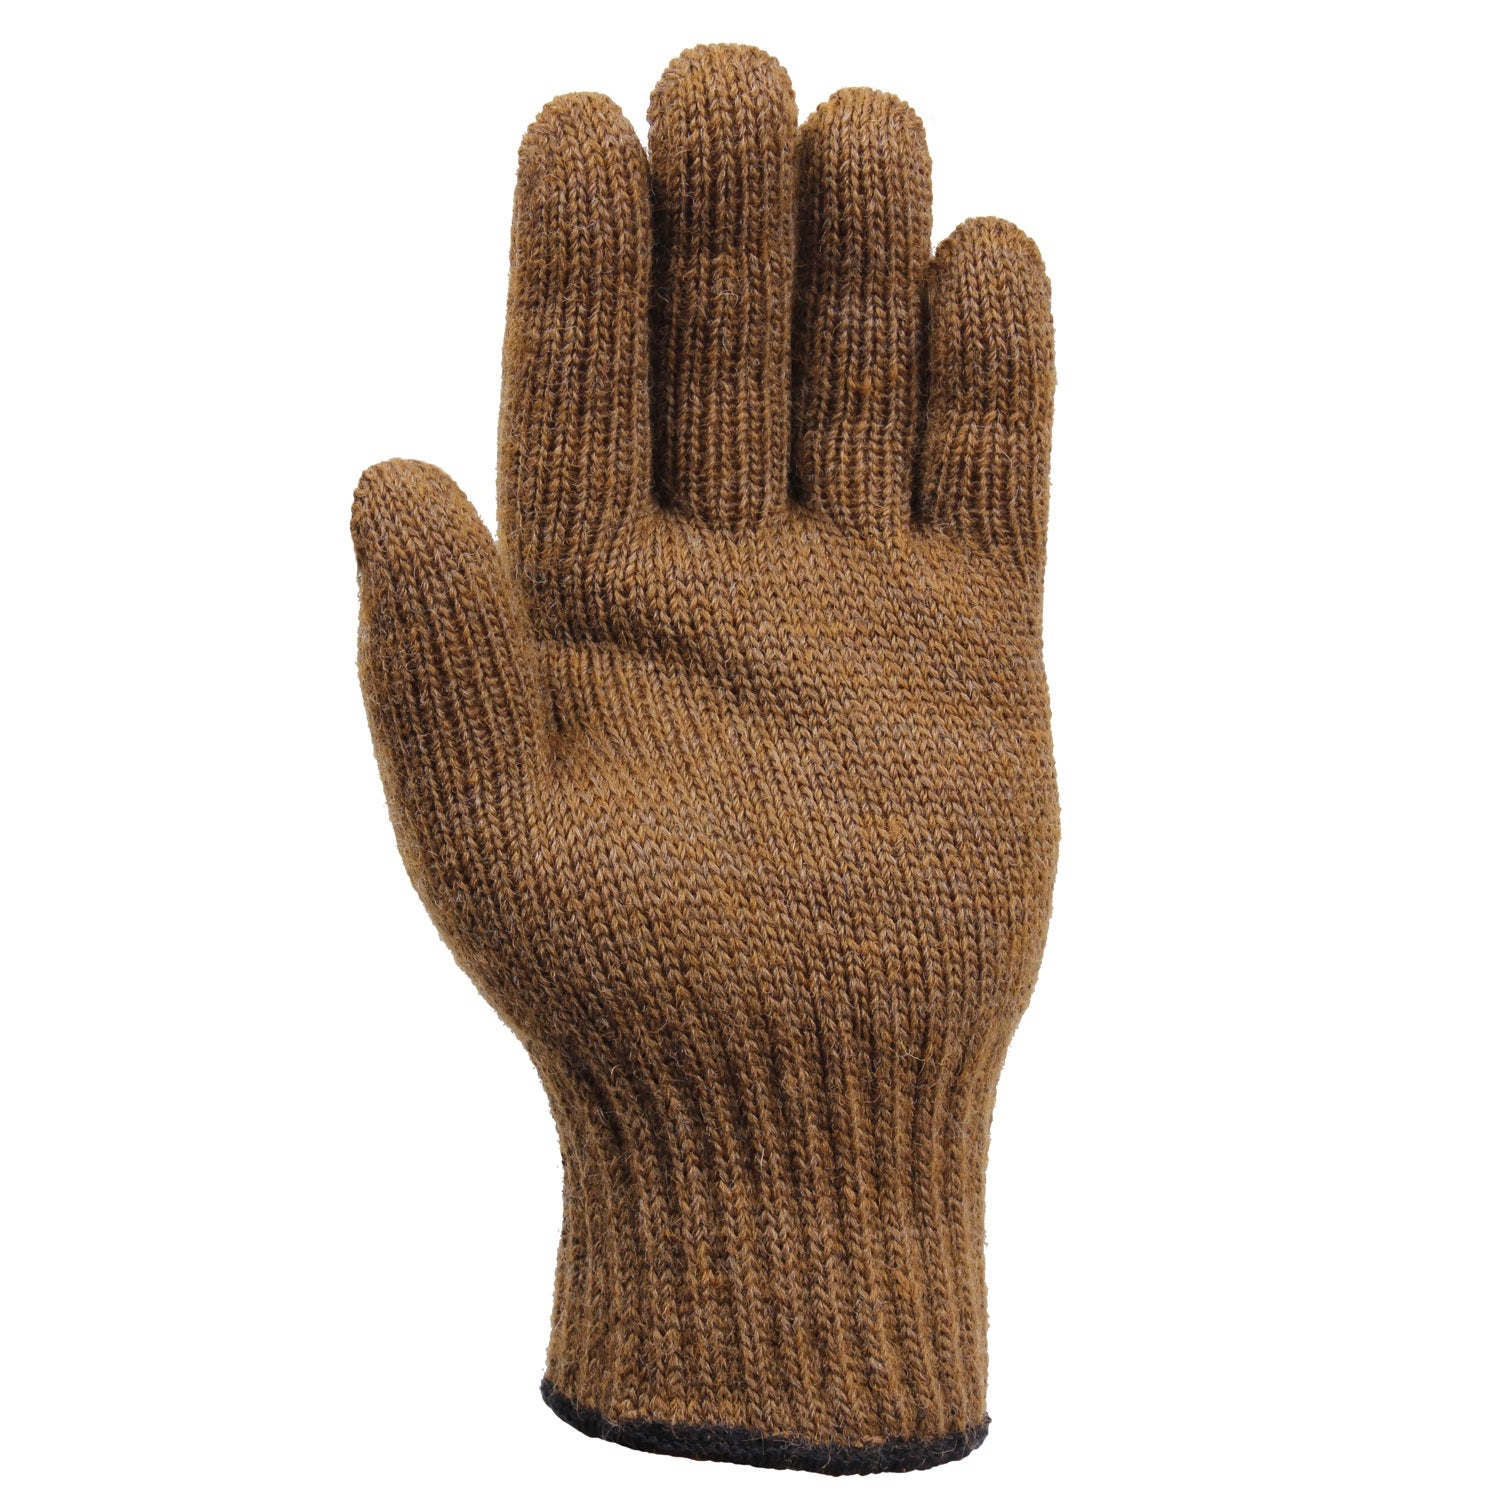 Rothco G.I. Glove Liners Coyote Brown